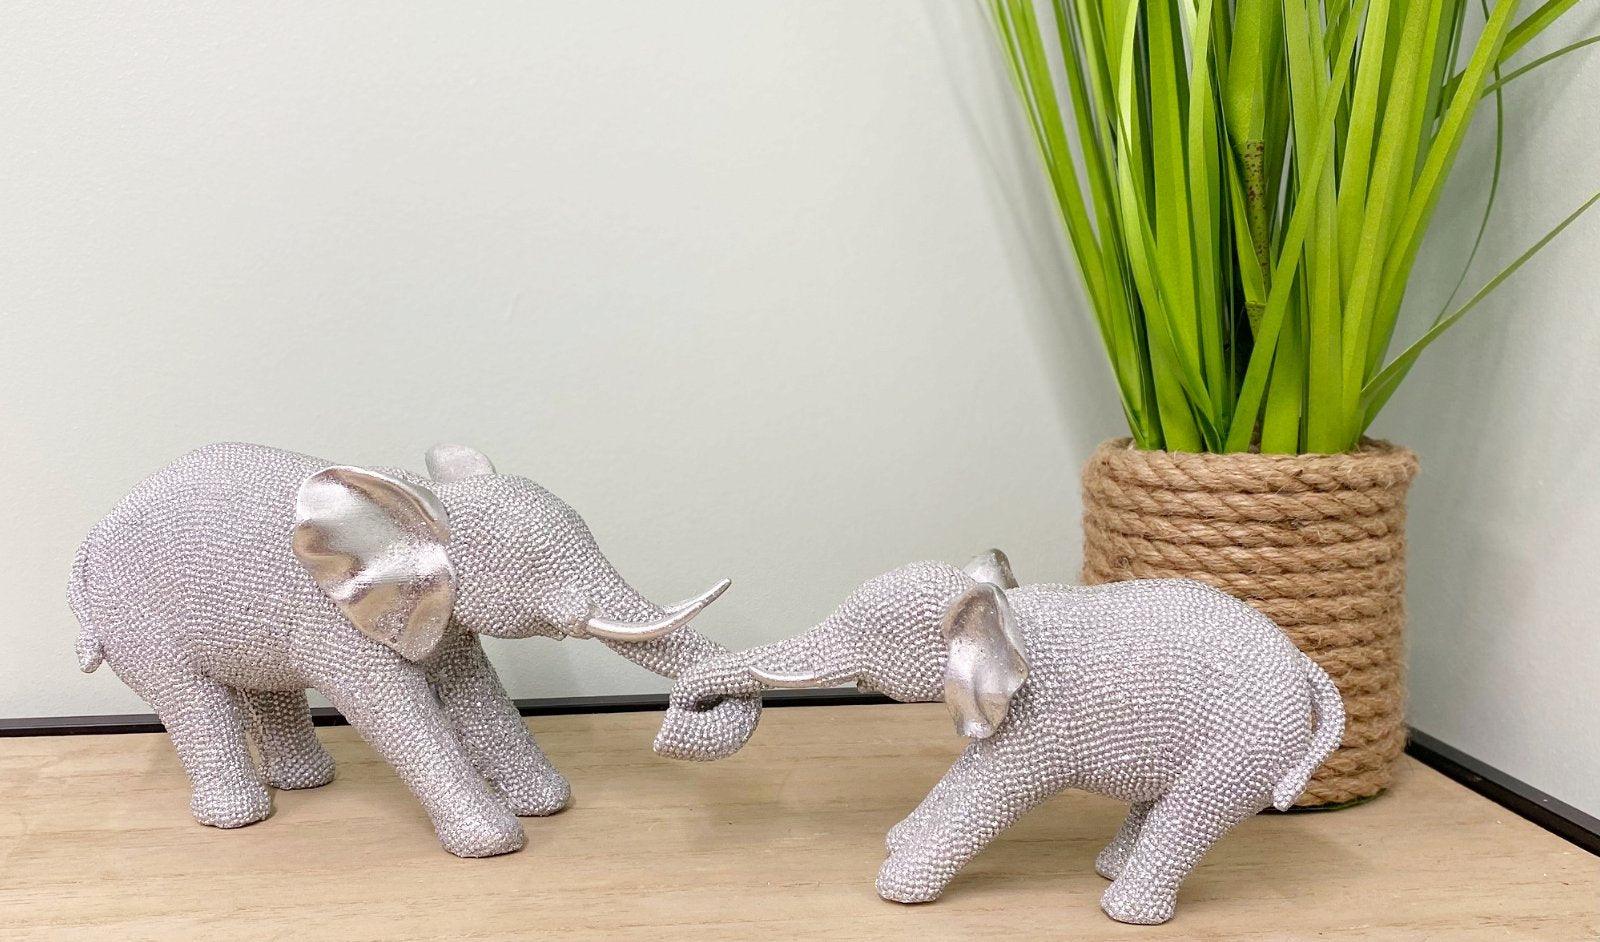 Silver Beaded Elephants Two Piece Mother & Calf - £49.99 - Figurines & Statues 